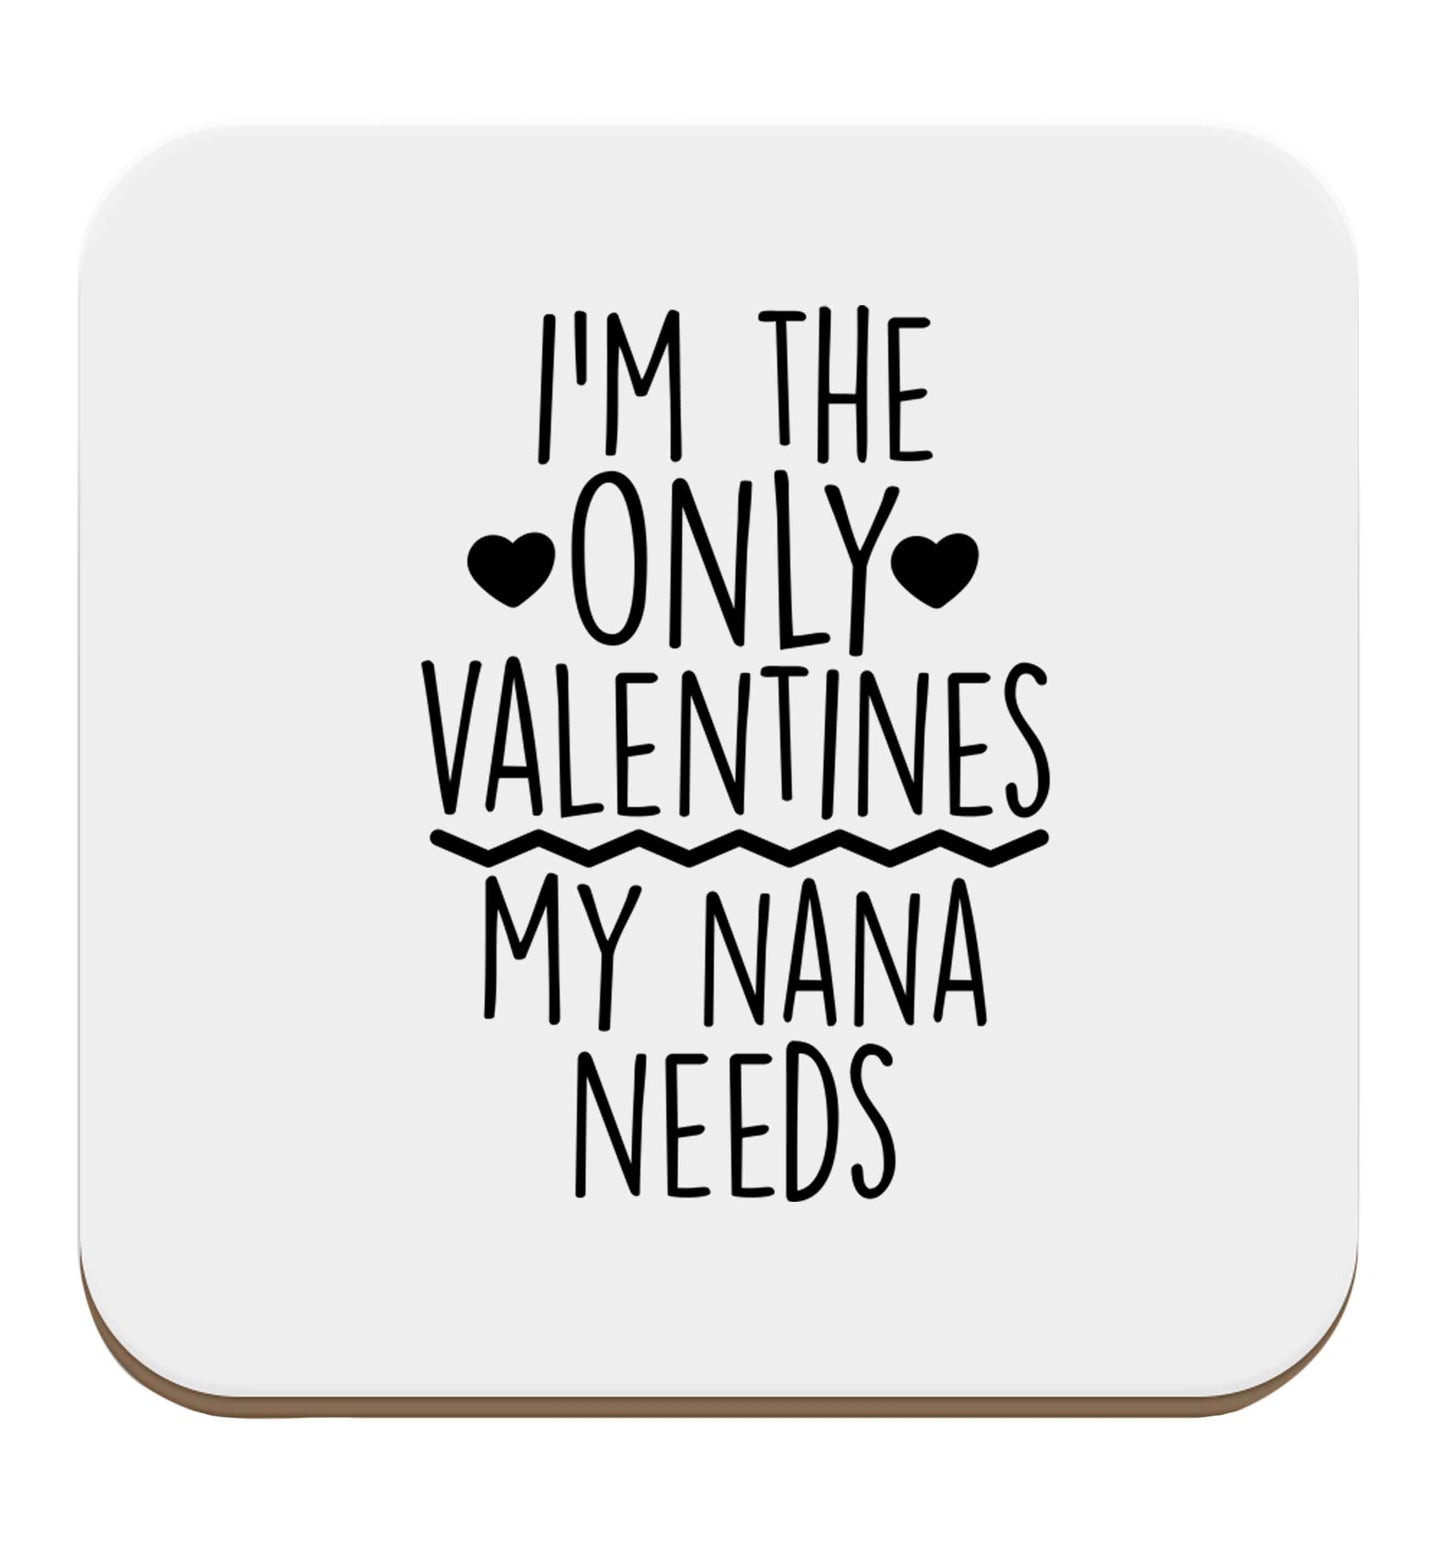 I'm the only valentines my nana needs set of four coasters